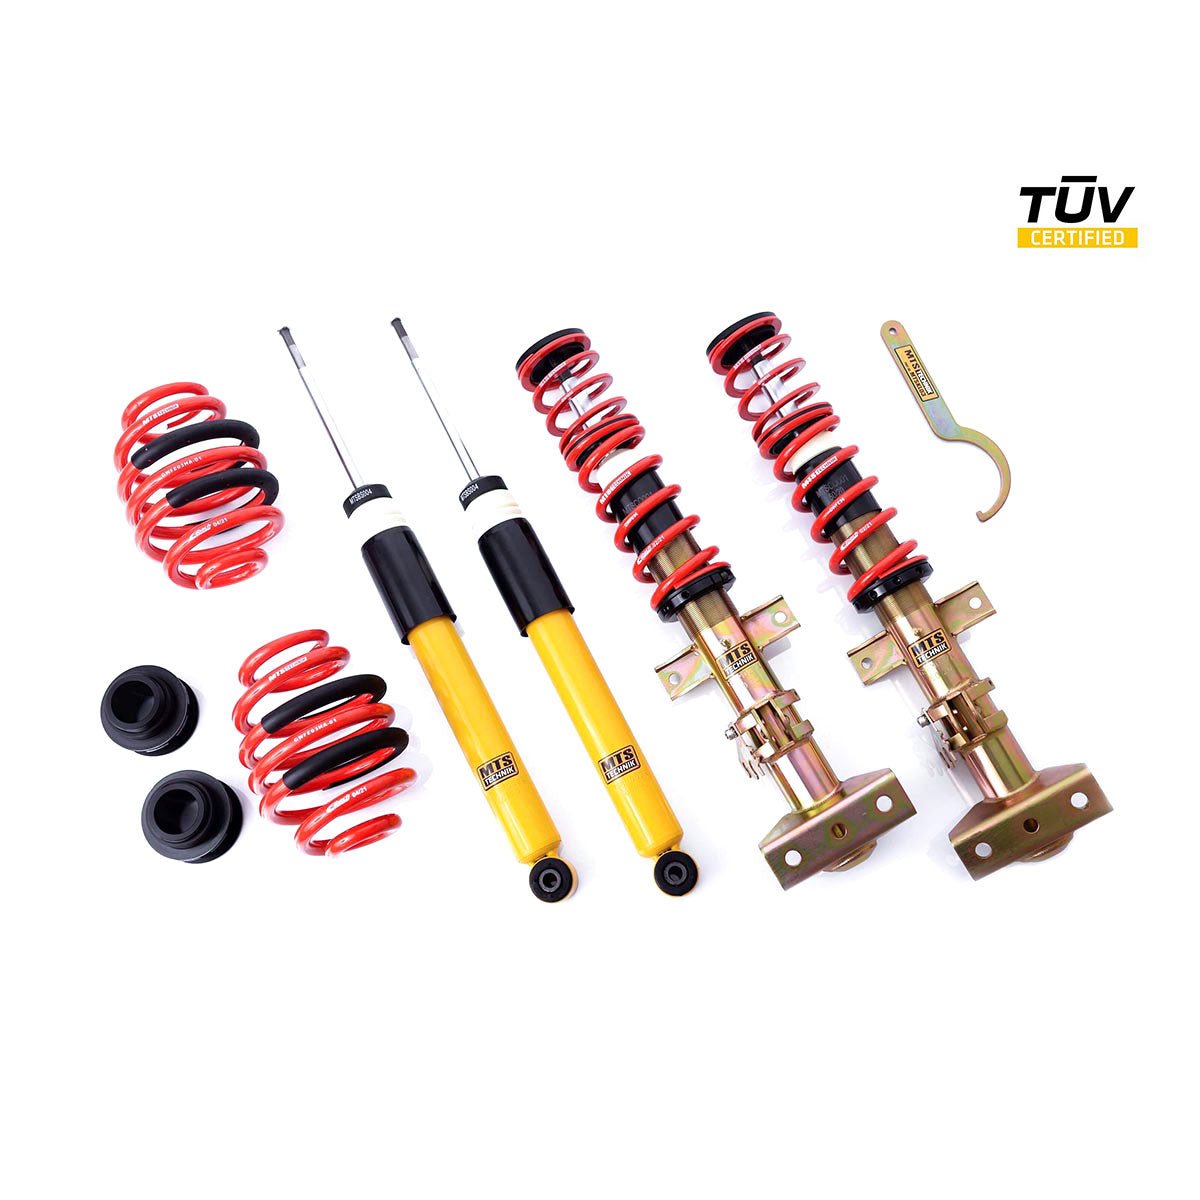 MTS TECHNIK coilover kit STREET BMW E36 Coupe (with TÜV) - PARTS33 GmbH